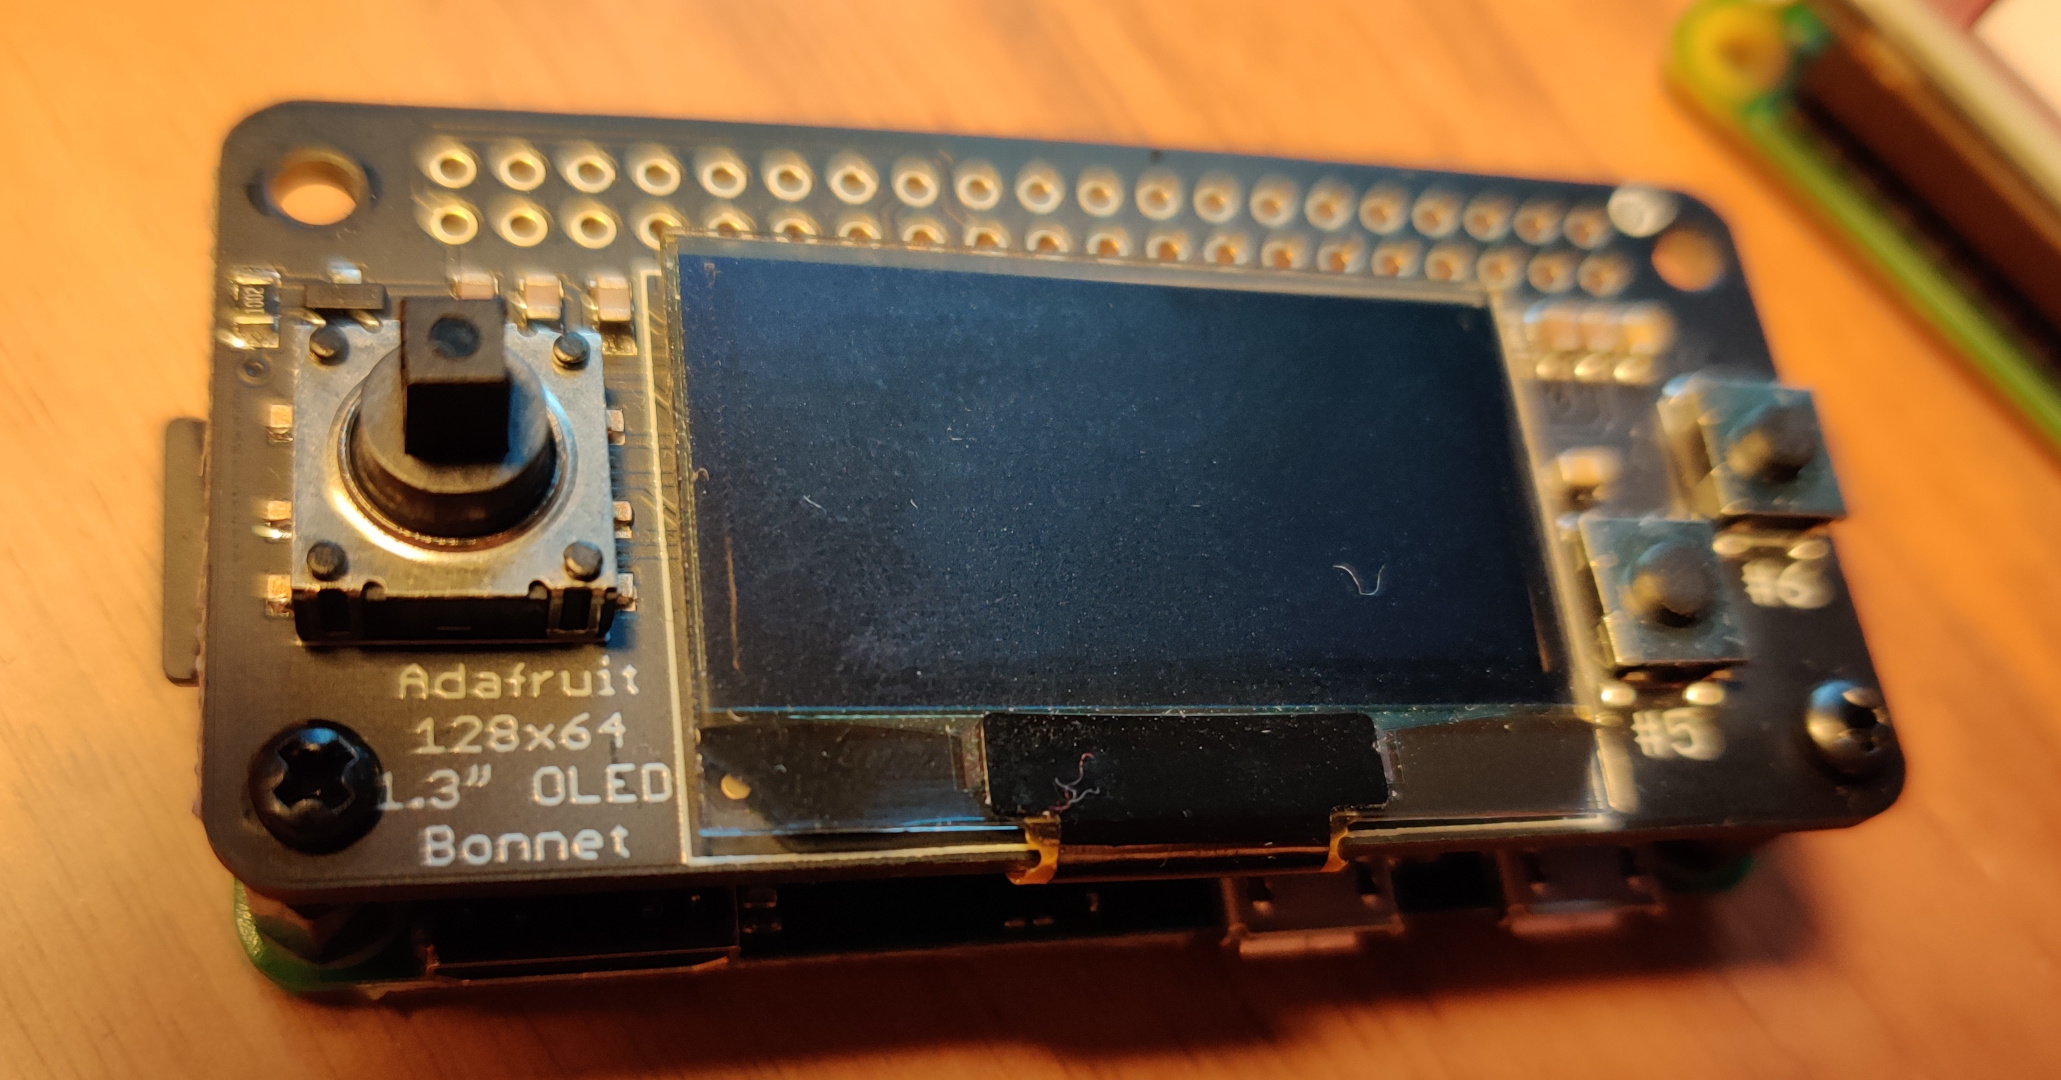 Unused Pi Zero with OLED Bonnet, looks like a small game console